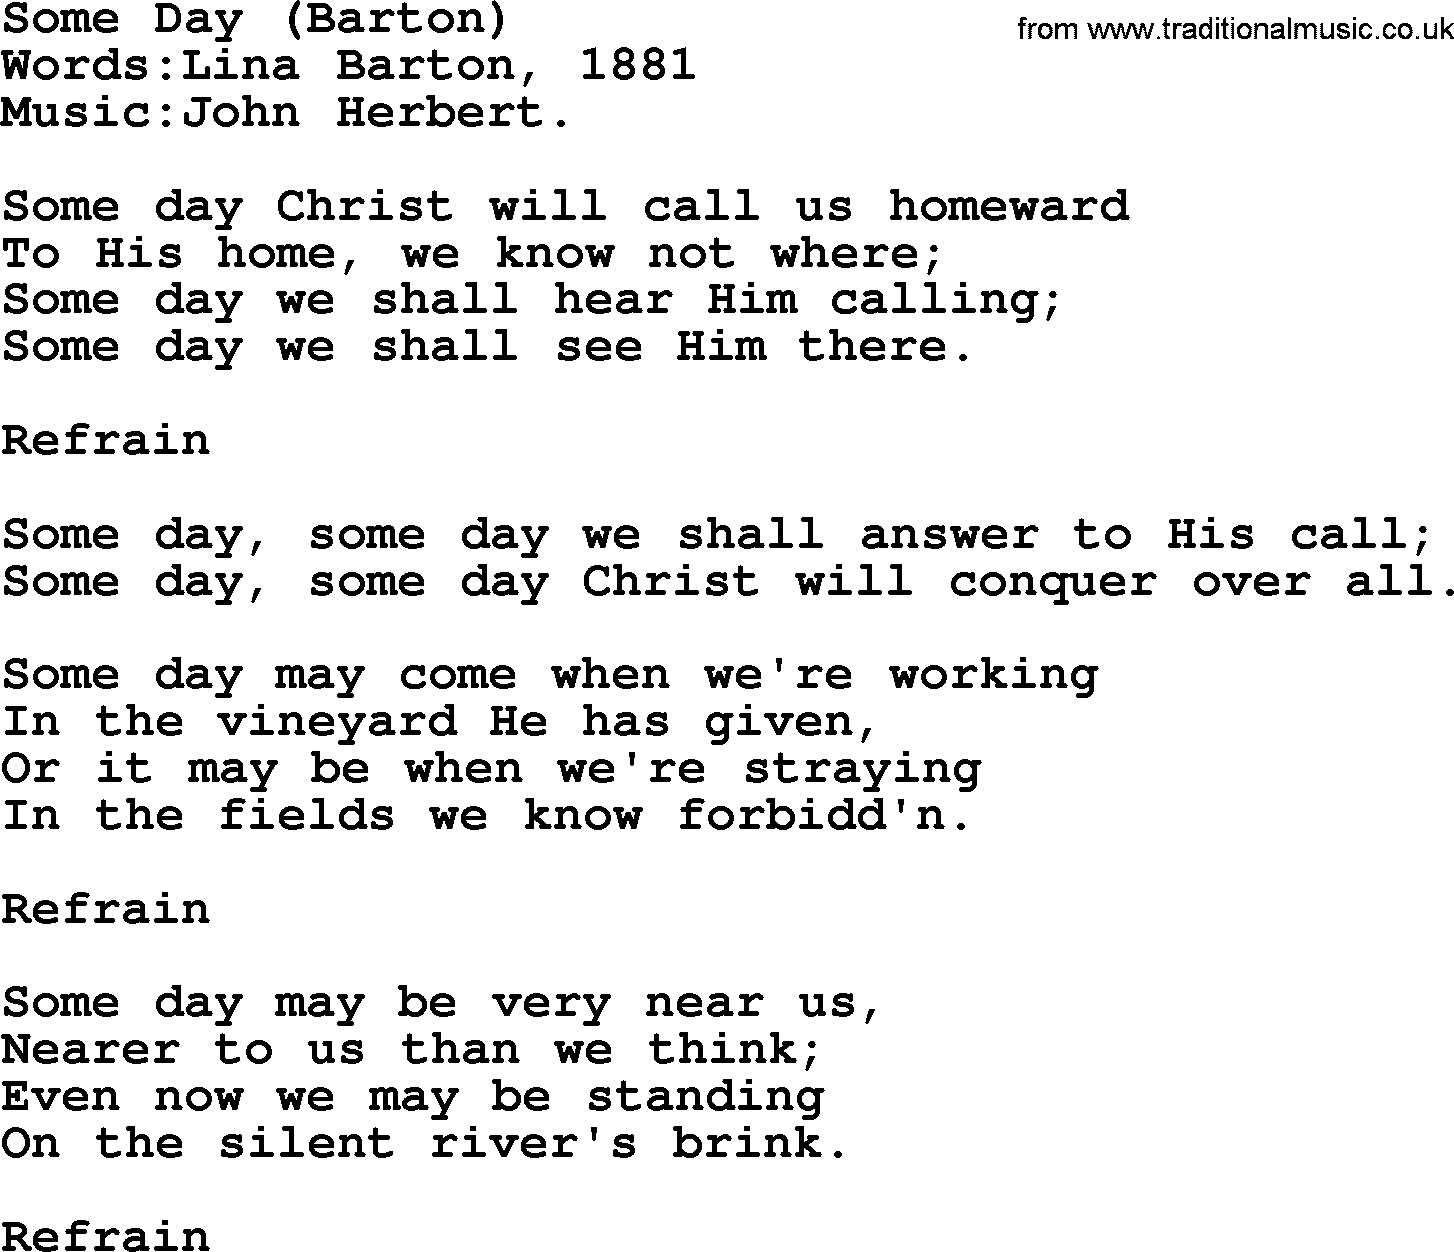 Christian hymns and songs about Jesus' Return(The Second Coming): Some Day(Barton), lyrics with PDF